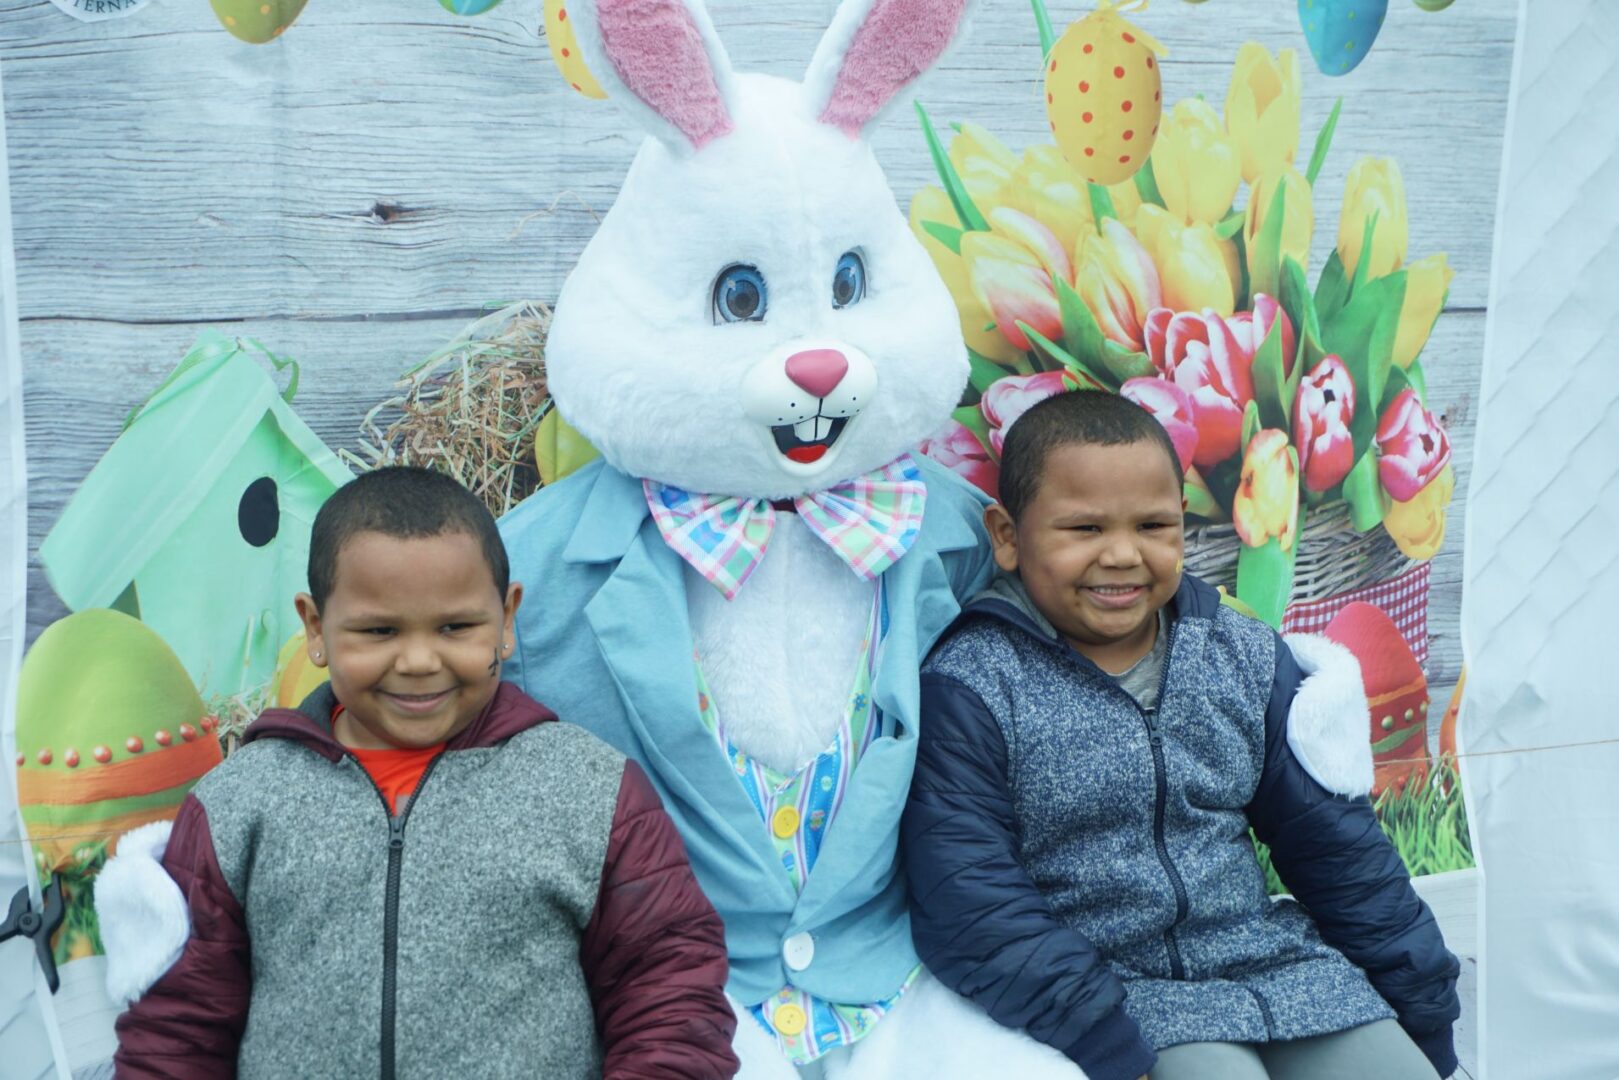 The bunny mascot together with twin boys wearing a blue and red jacket (1)